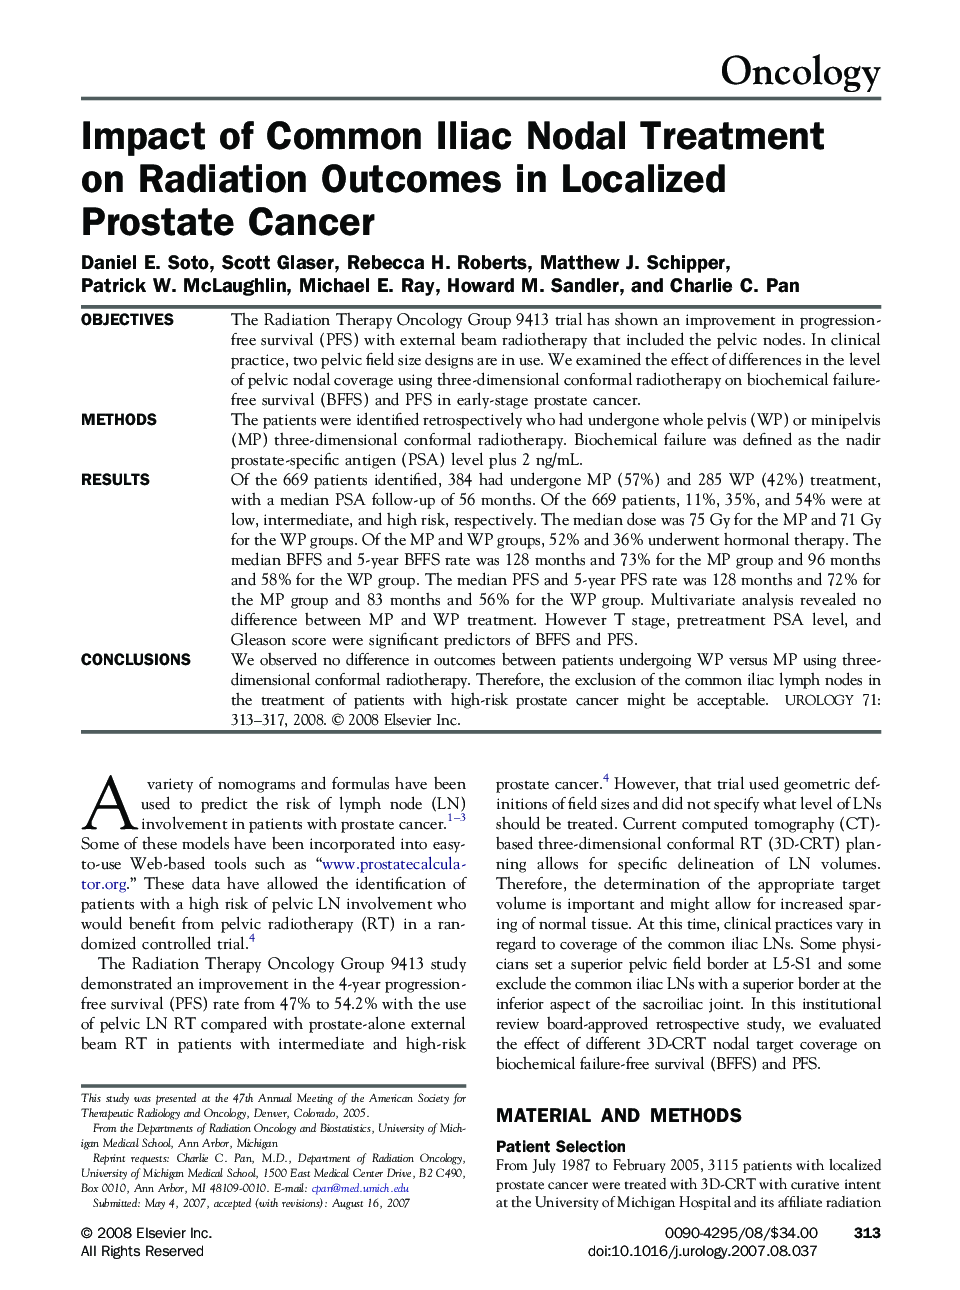 Impact of Common Iliac Nodal Treatment on Radiation Outcomes in Localized Prostate Cancer